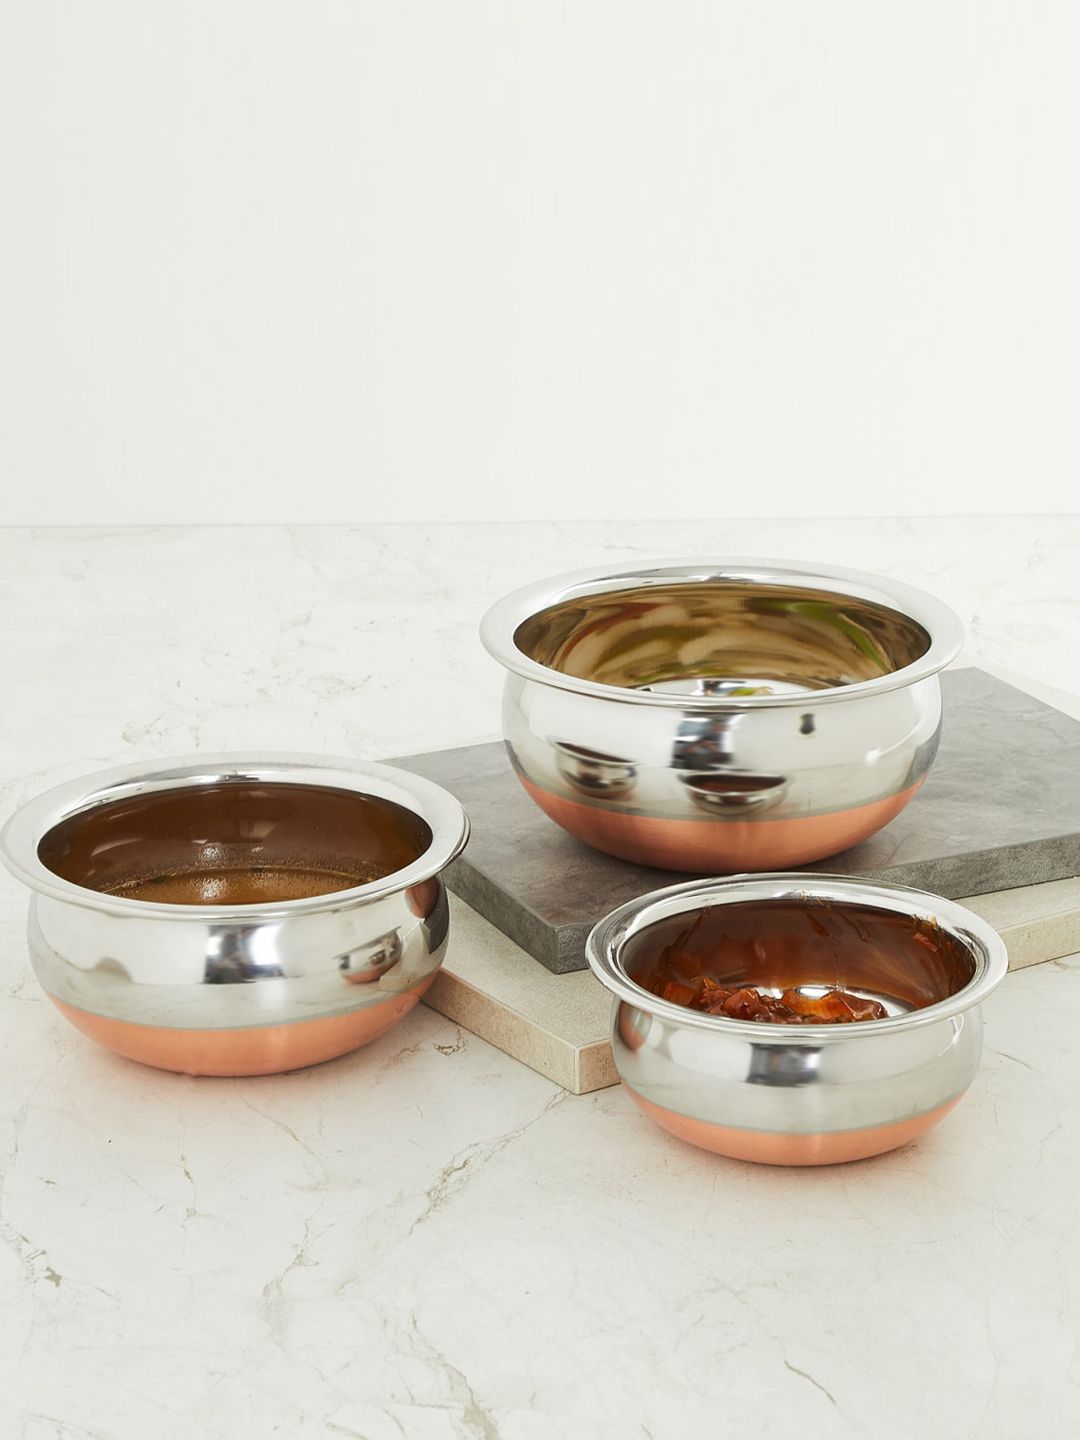 Home Centre Set Of 3 Silver Cookware Stainless Steel Price in India